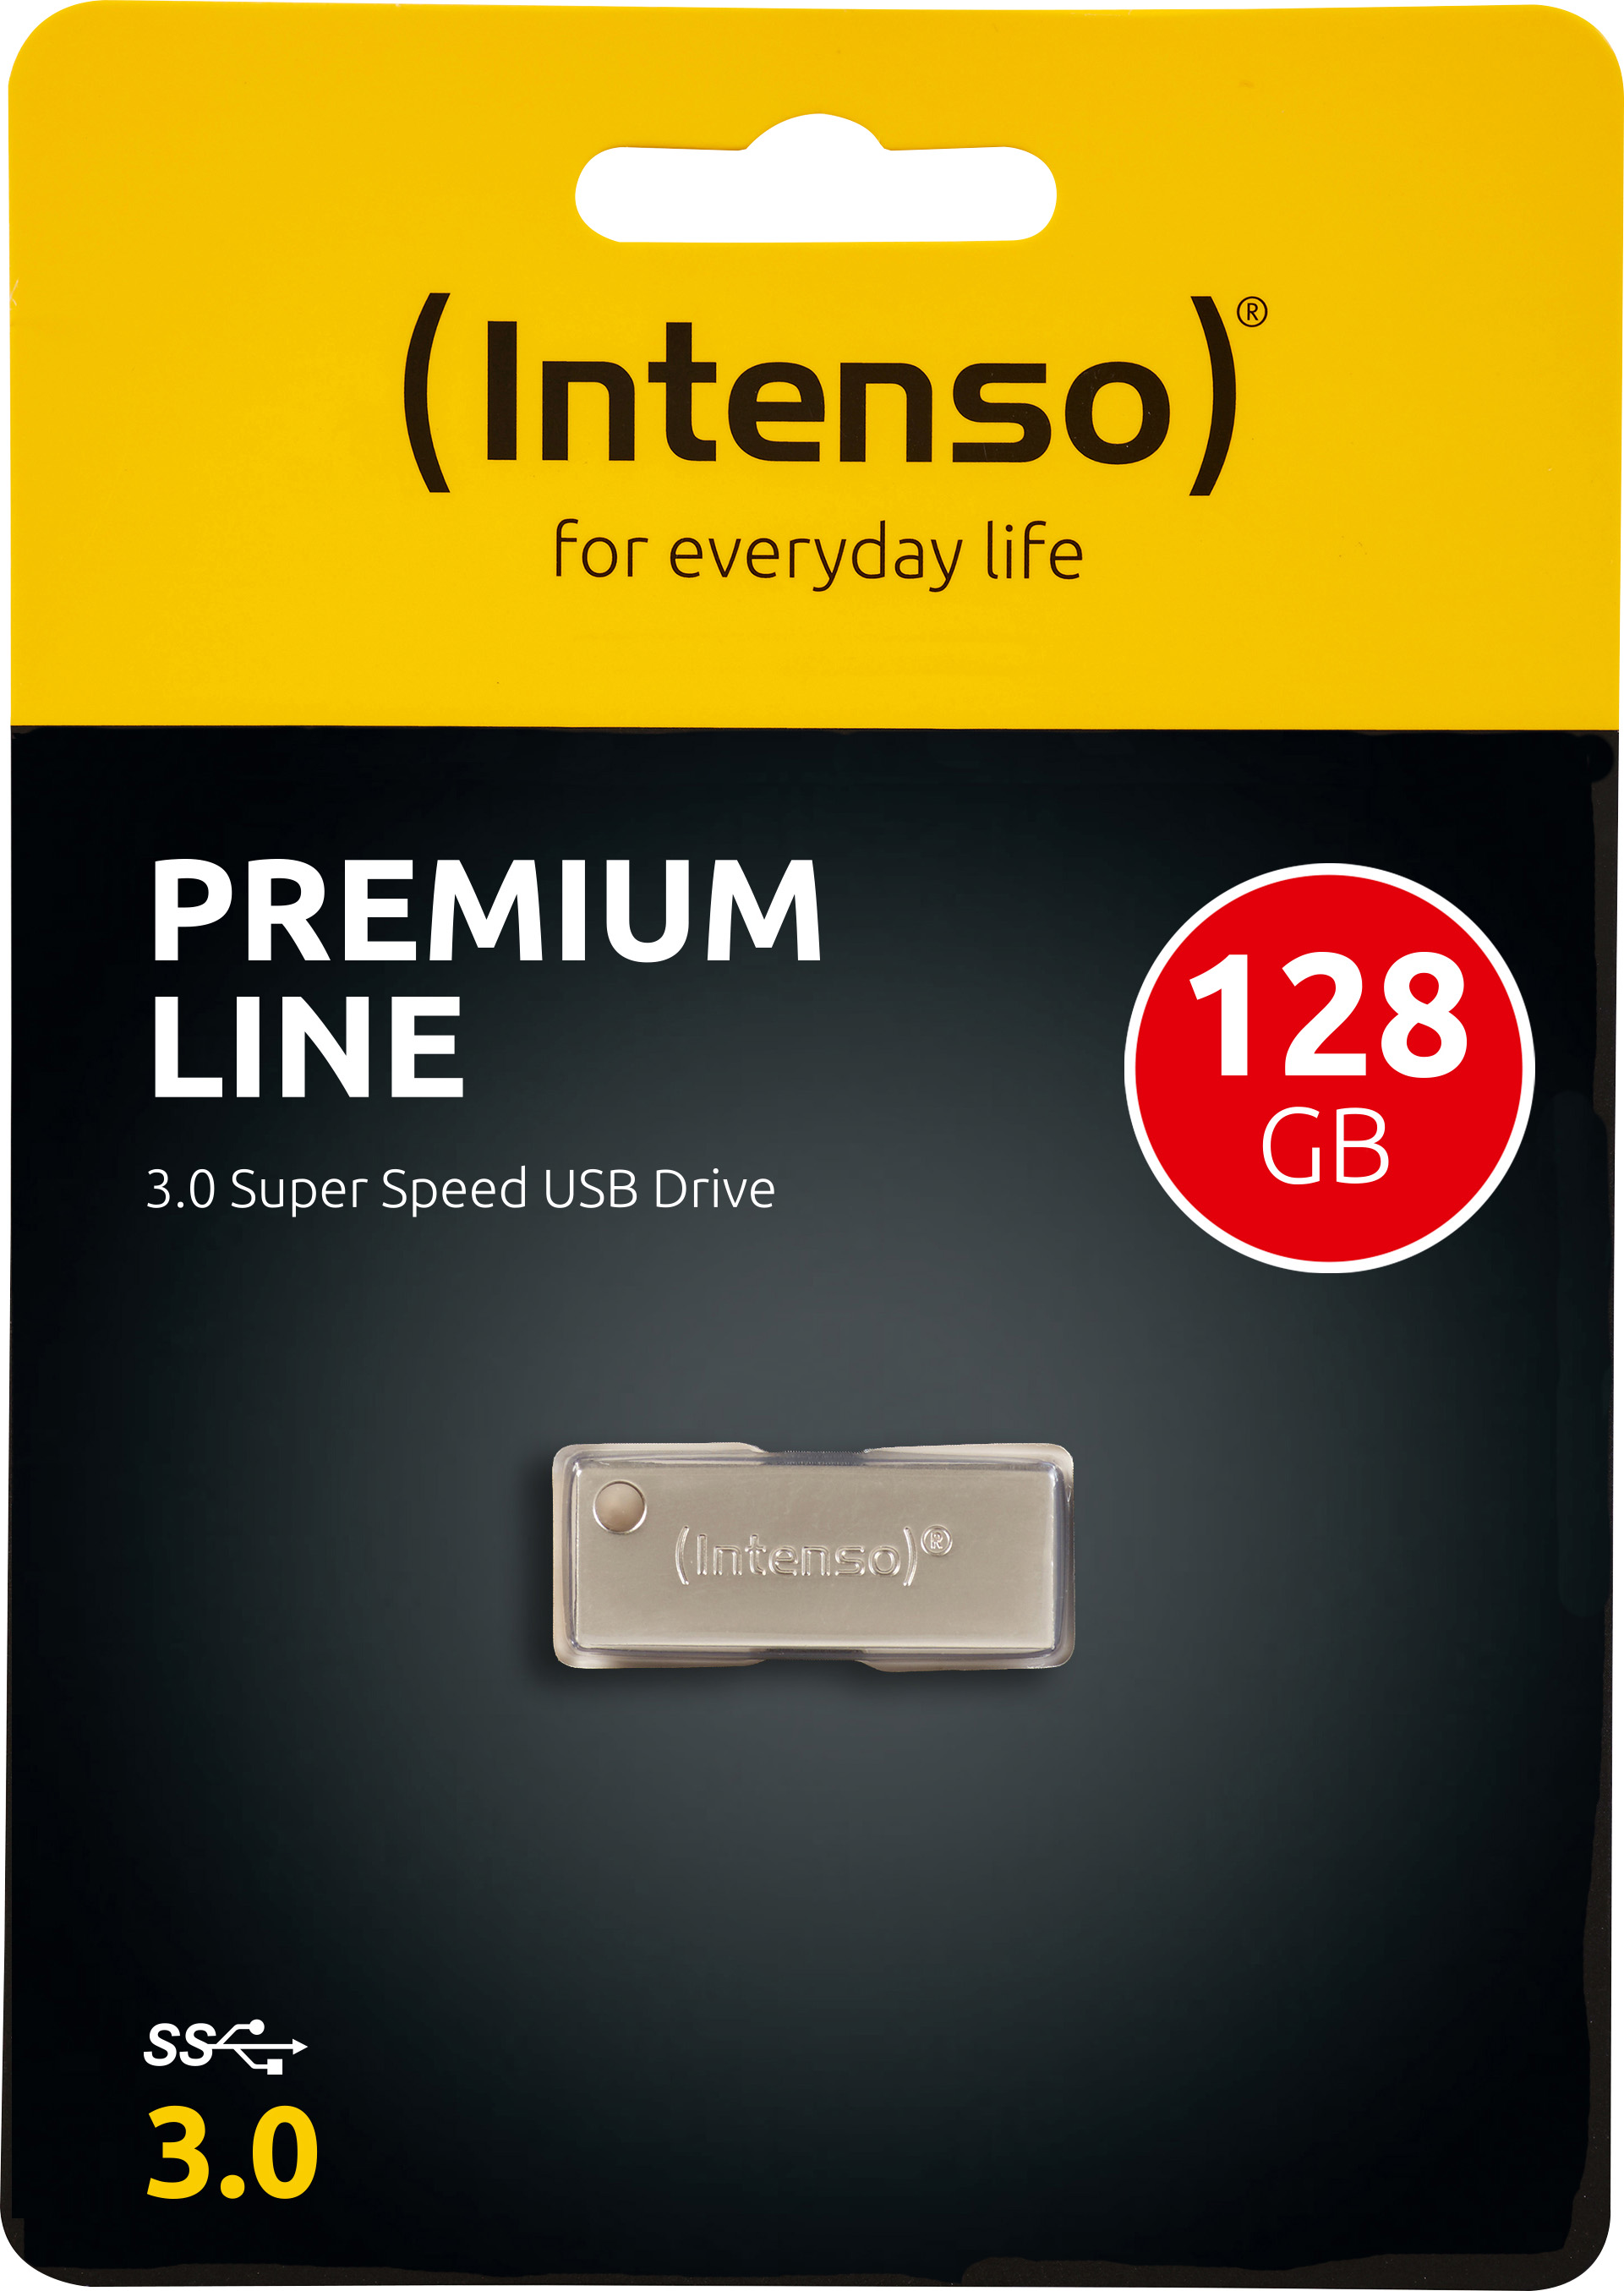 Intenso USB 3.0 Stick 128GB, Premium Line, Metall, silber Typ-A, (R) 100MB/s, Retail-Blister